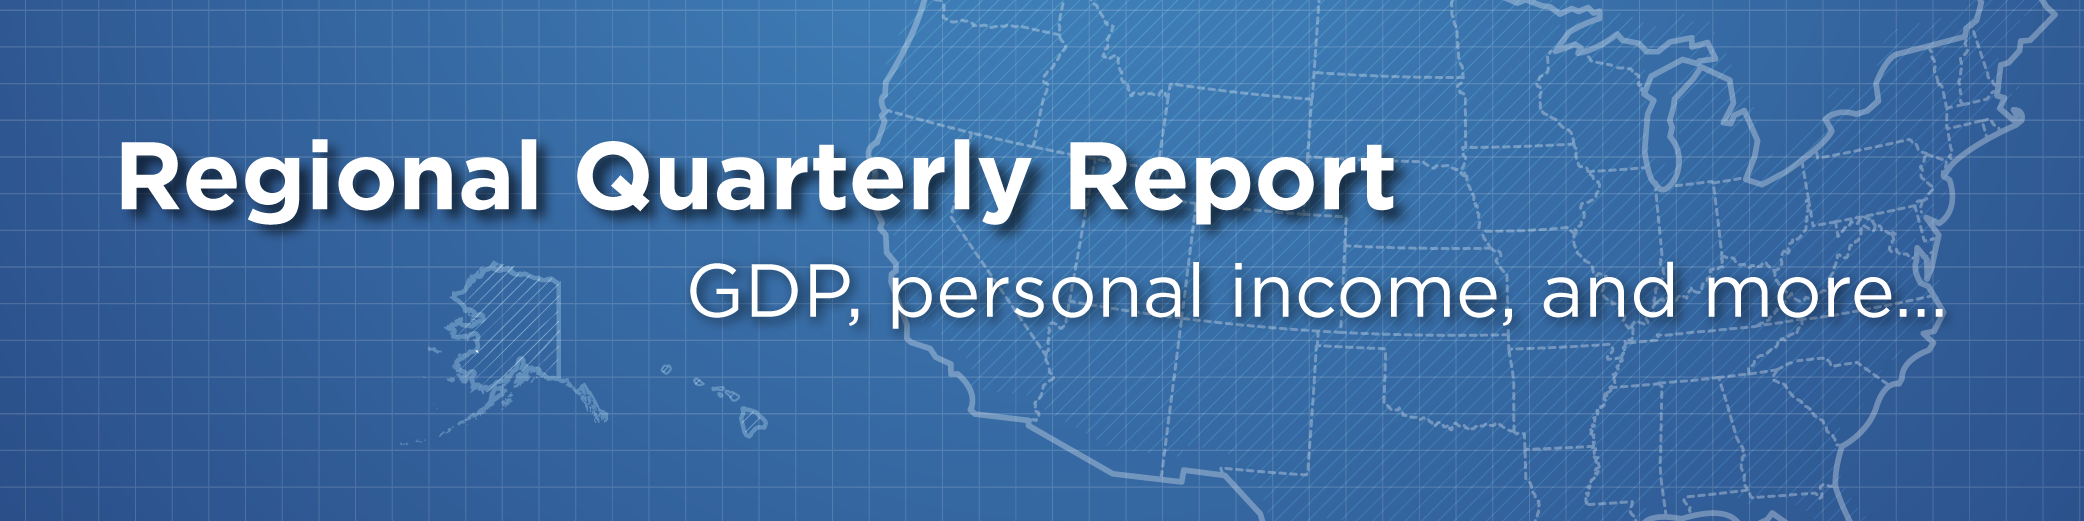 Regional Quarterly Report: GDP, personal income, and more...